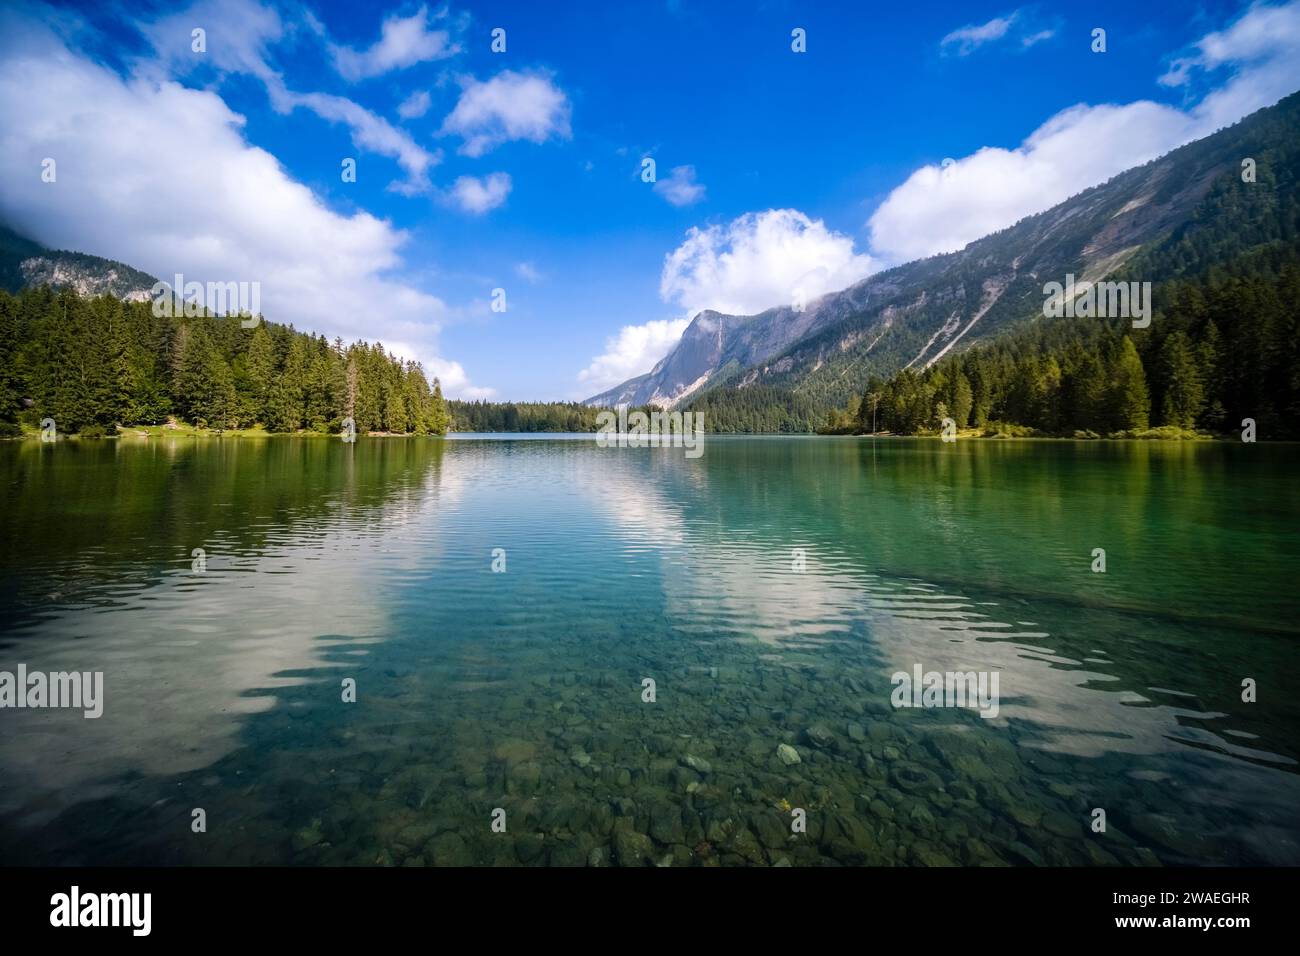 View over the surface of the lake Lago di Tovel, the rock cliff of the mountain Monte Corno in the distance. Stock Photo